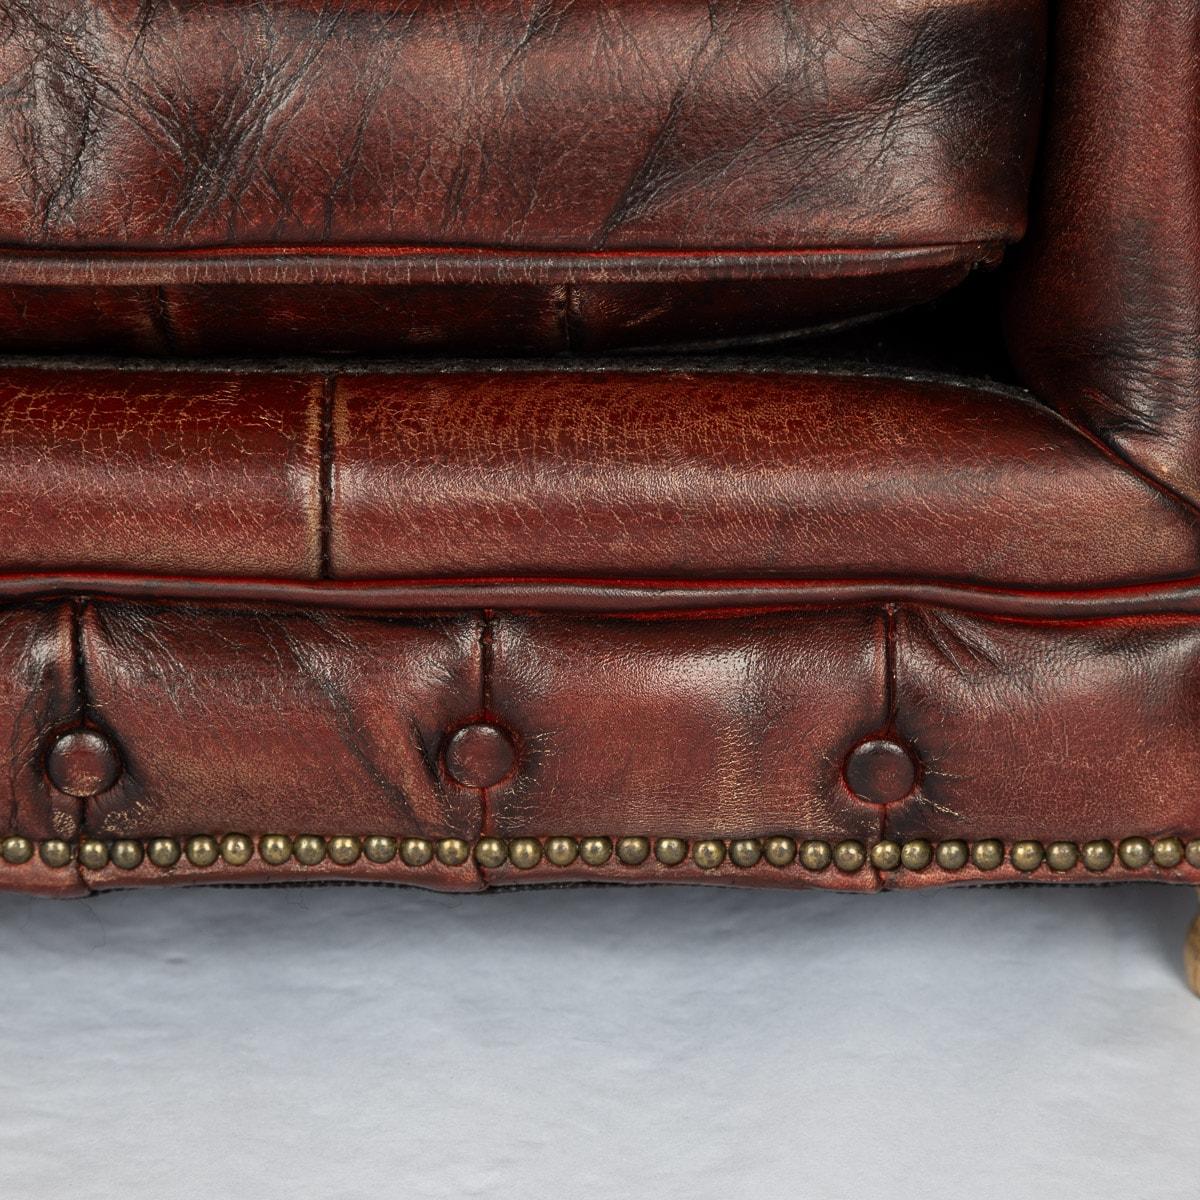 20th Century English Chesterfield Miniature Leather Sofa With Cushion Seats For Sale 4